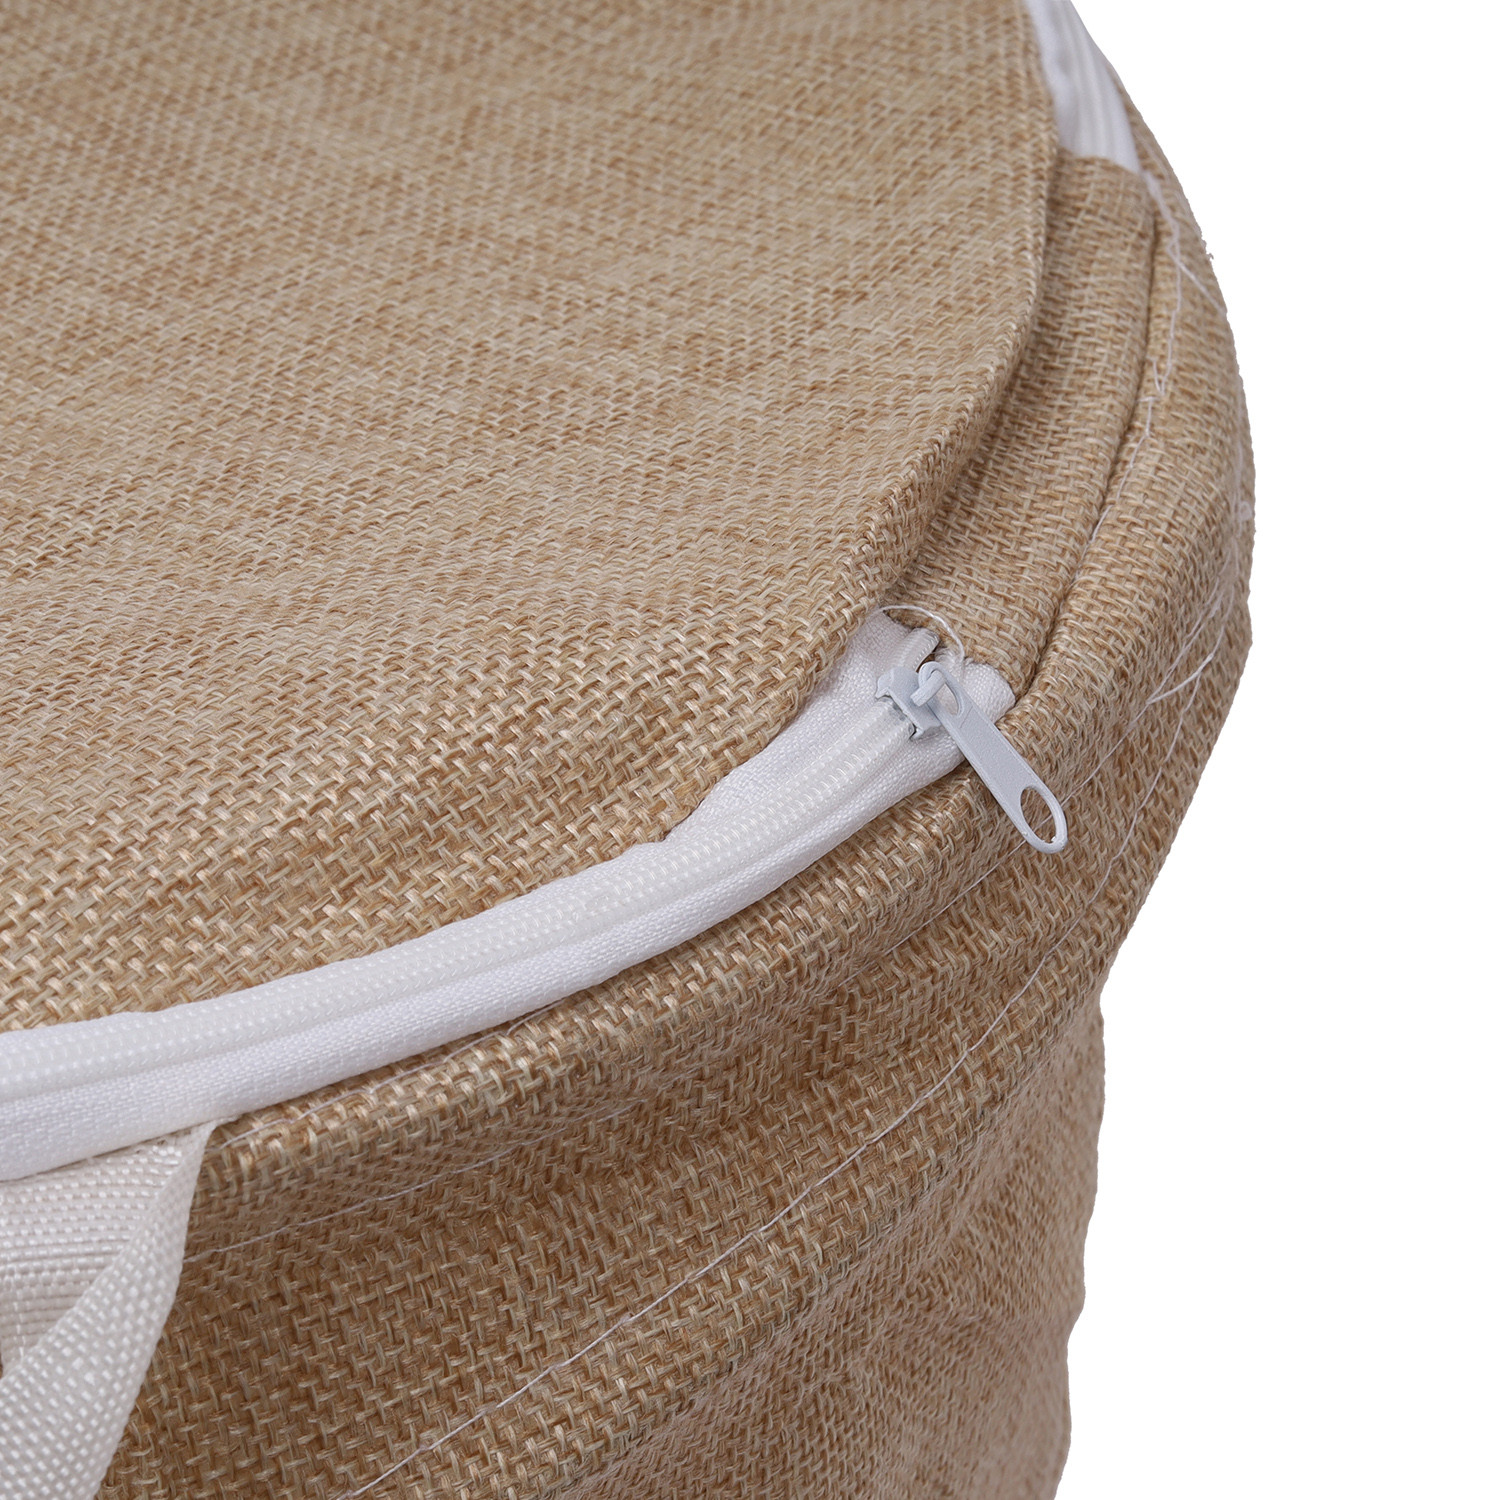 Kuber Industries Laundry Basket | Round Foldable Laundry Basket | Jute Storage Bag with Button Handles | Clothes Basket for Home | Toy Storage Basket | 45 LTR | Beige